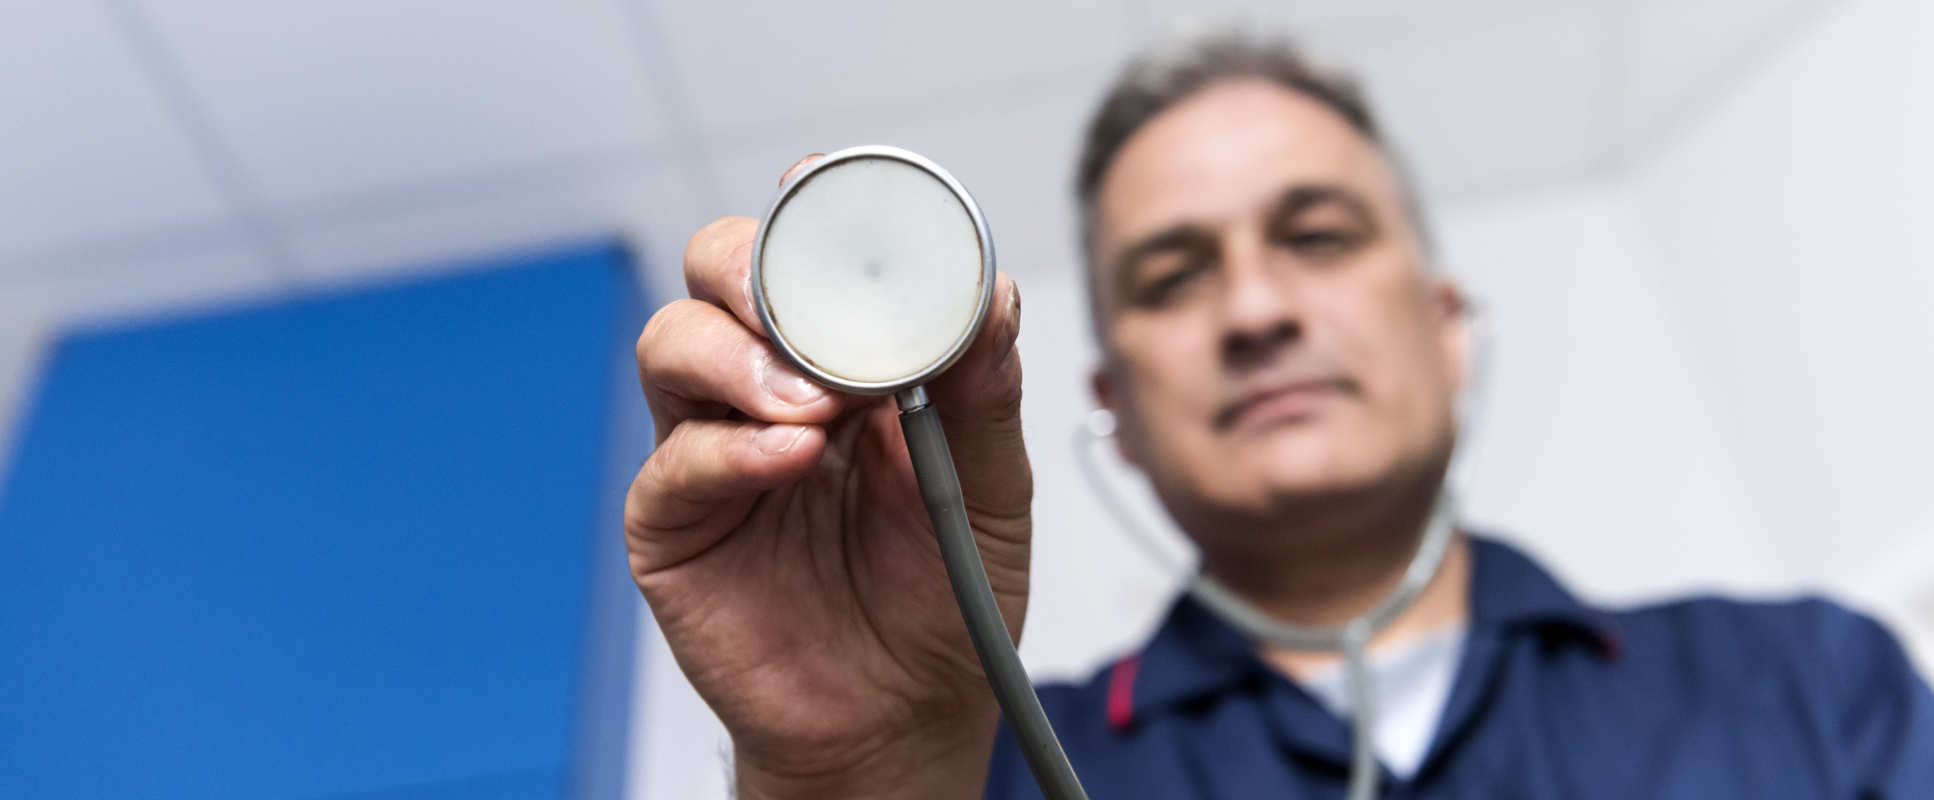 Nurse with stethoscope leans to camera